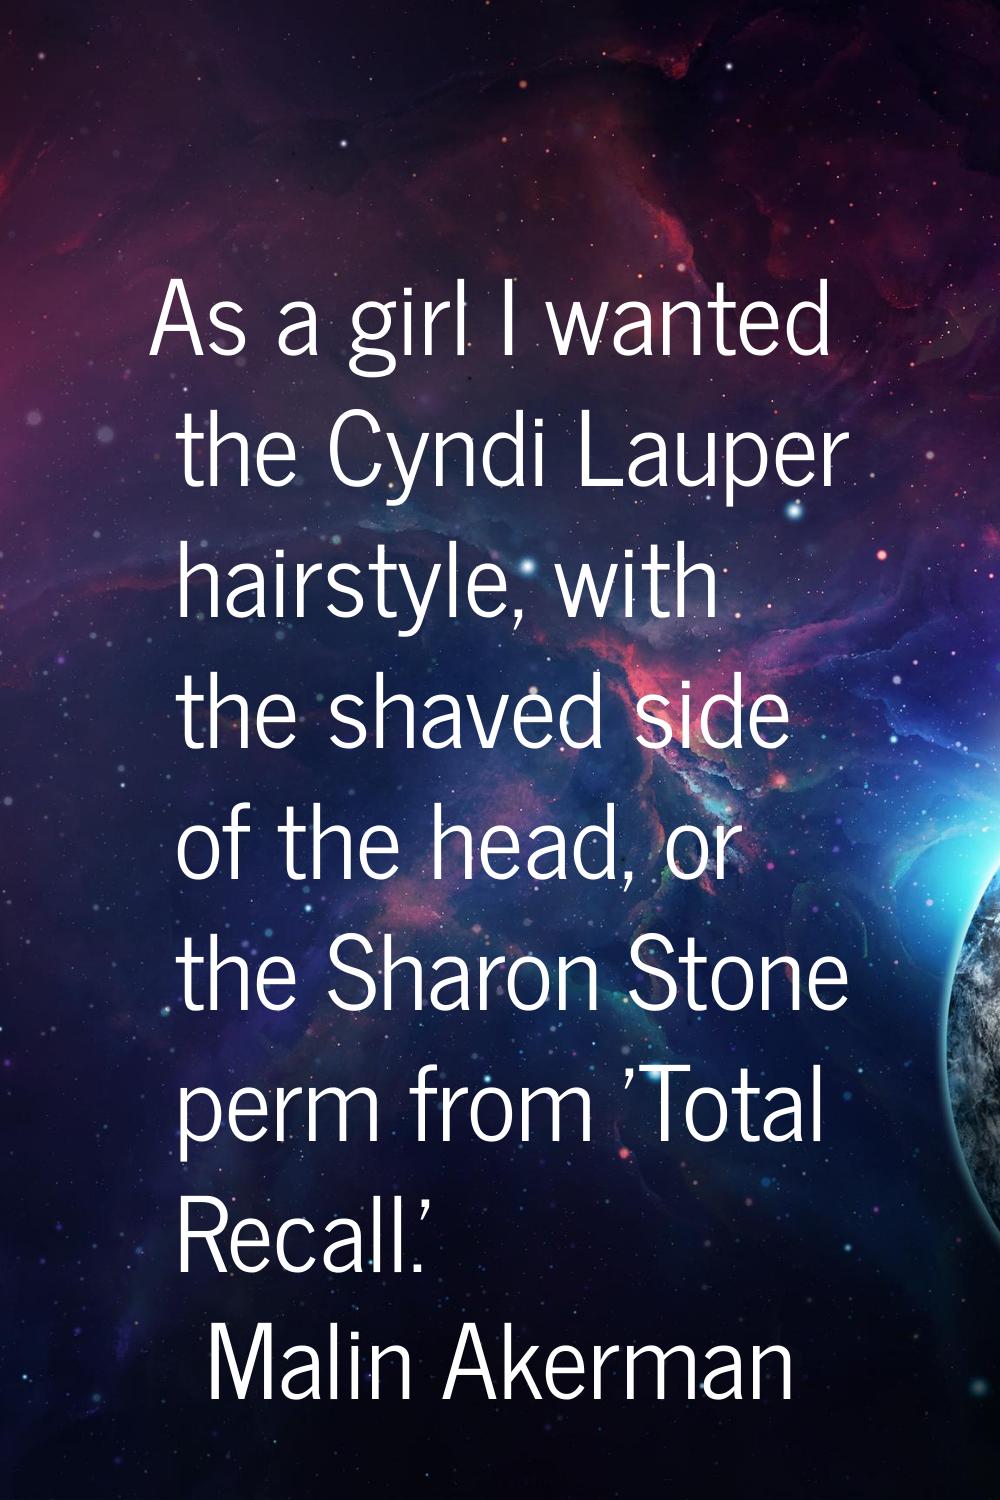 As a girl I wanted the Cyndi Lauper hairstyle, with the shaved side of the head, or the Sharon Ston